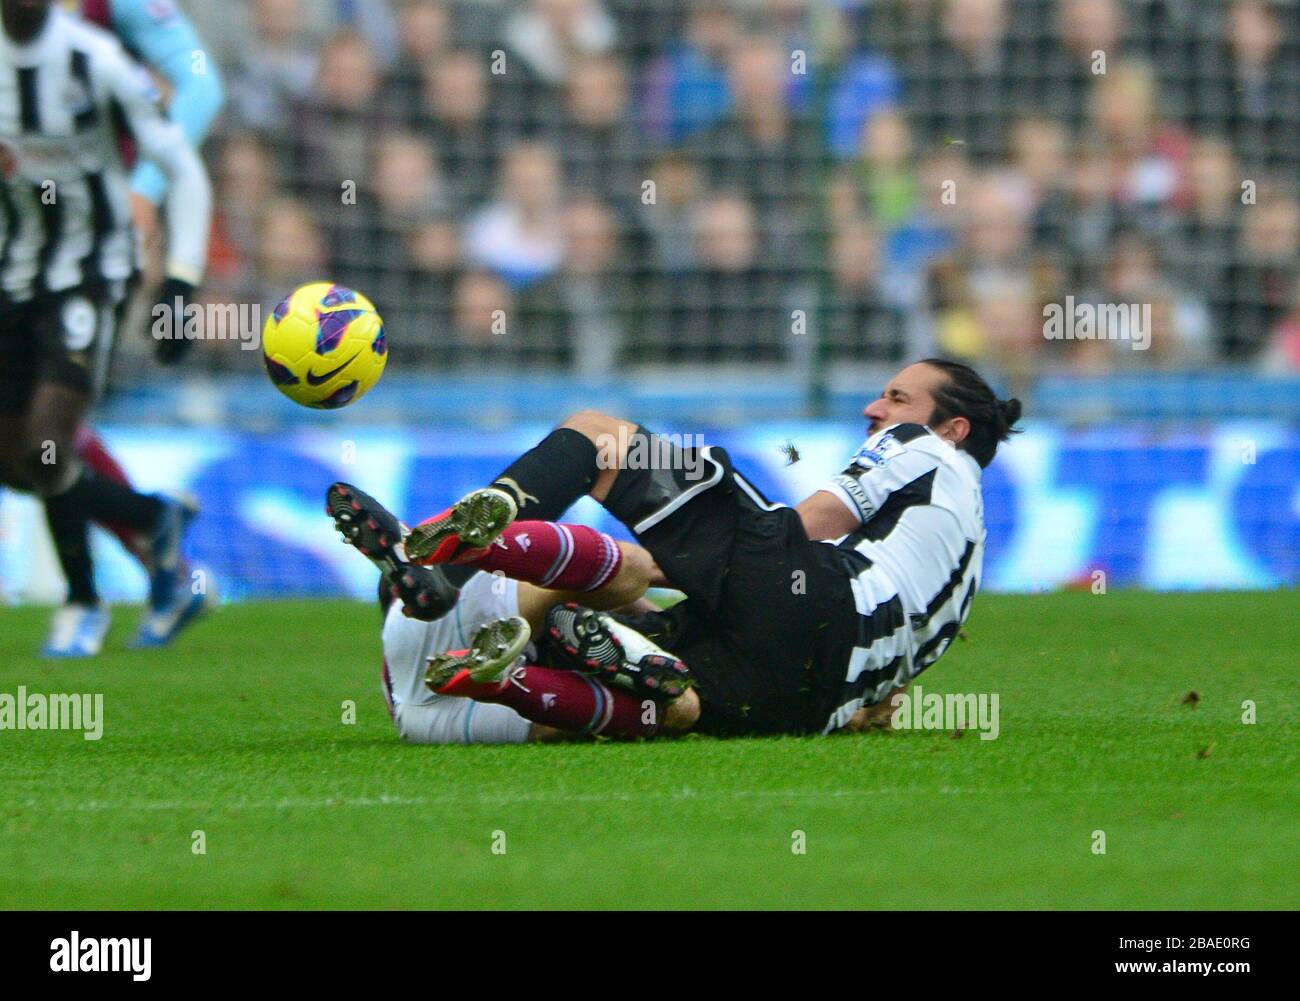 Newcastle United's Jonas Gutierrez (right) clashes with West Ham United's Yossi Benayoun (left) as they battle for the ball Stock Photo